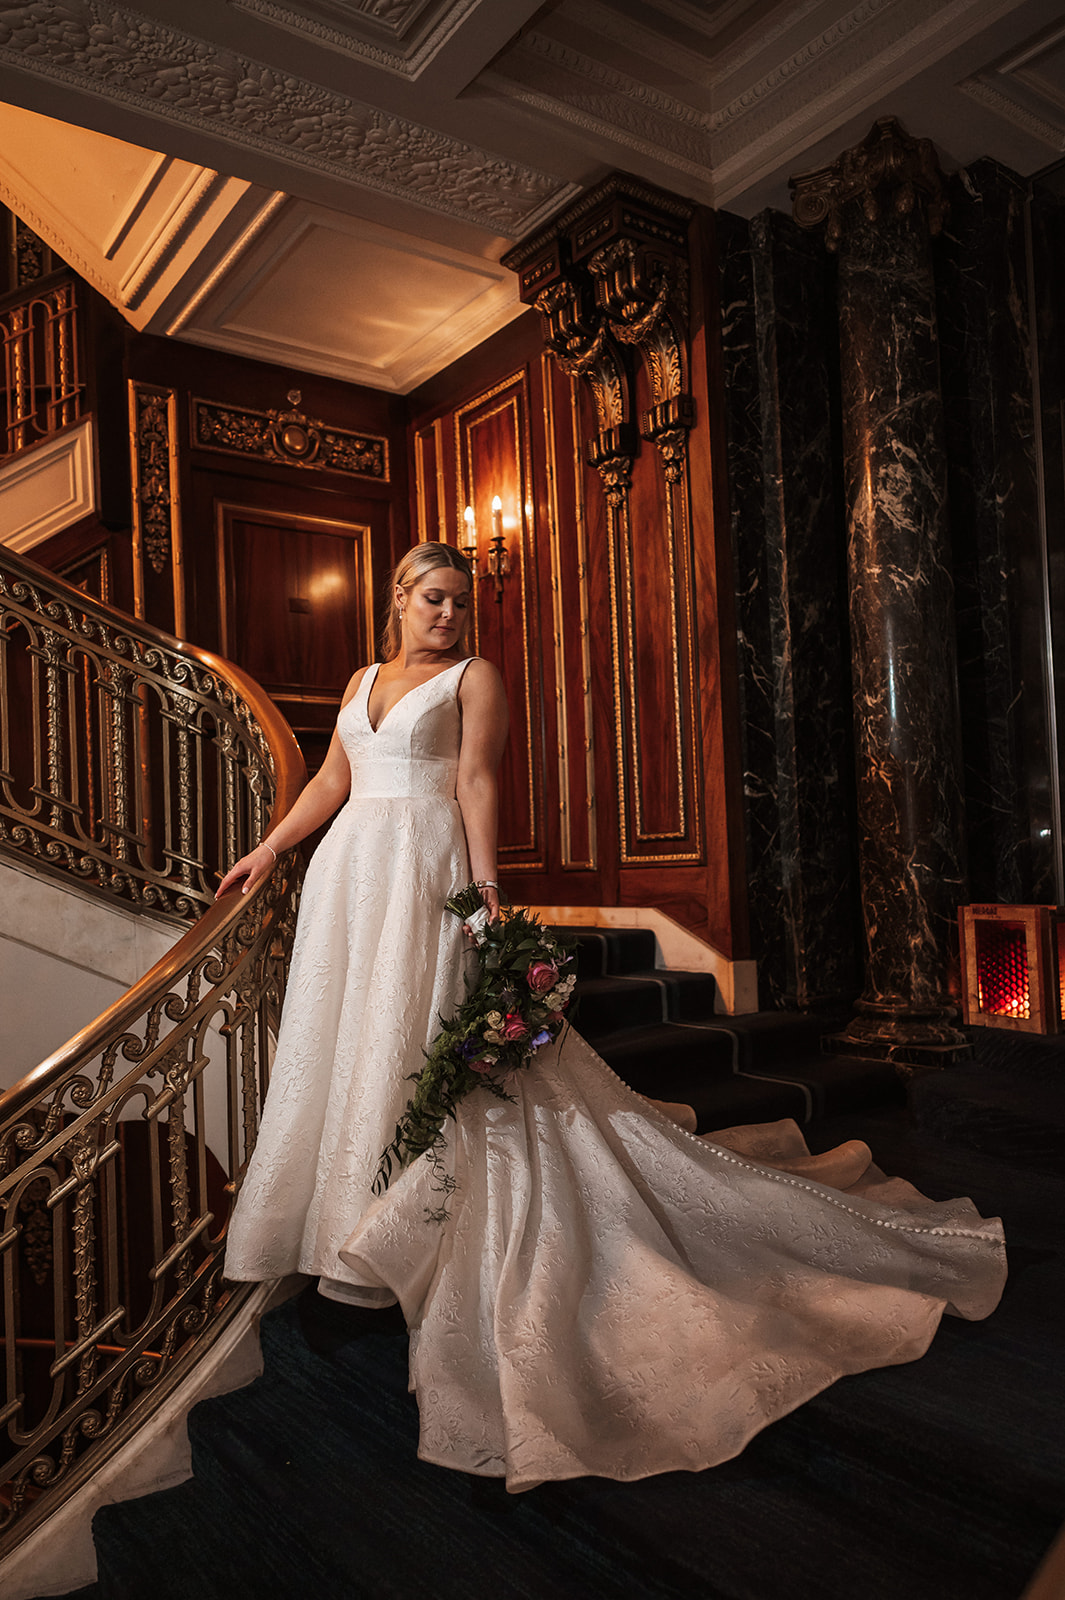 Bride and groom at the staircase of The Blackstone hotel in chicago